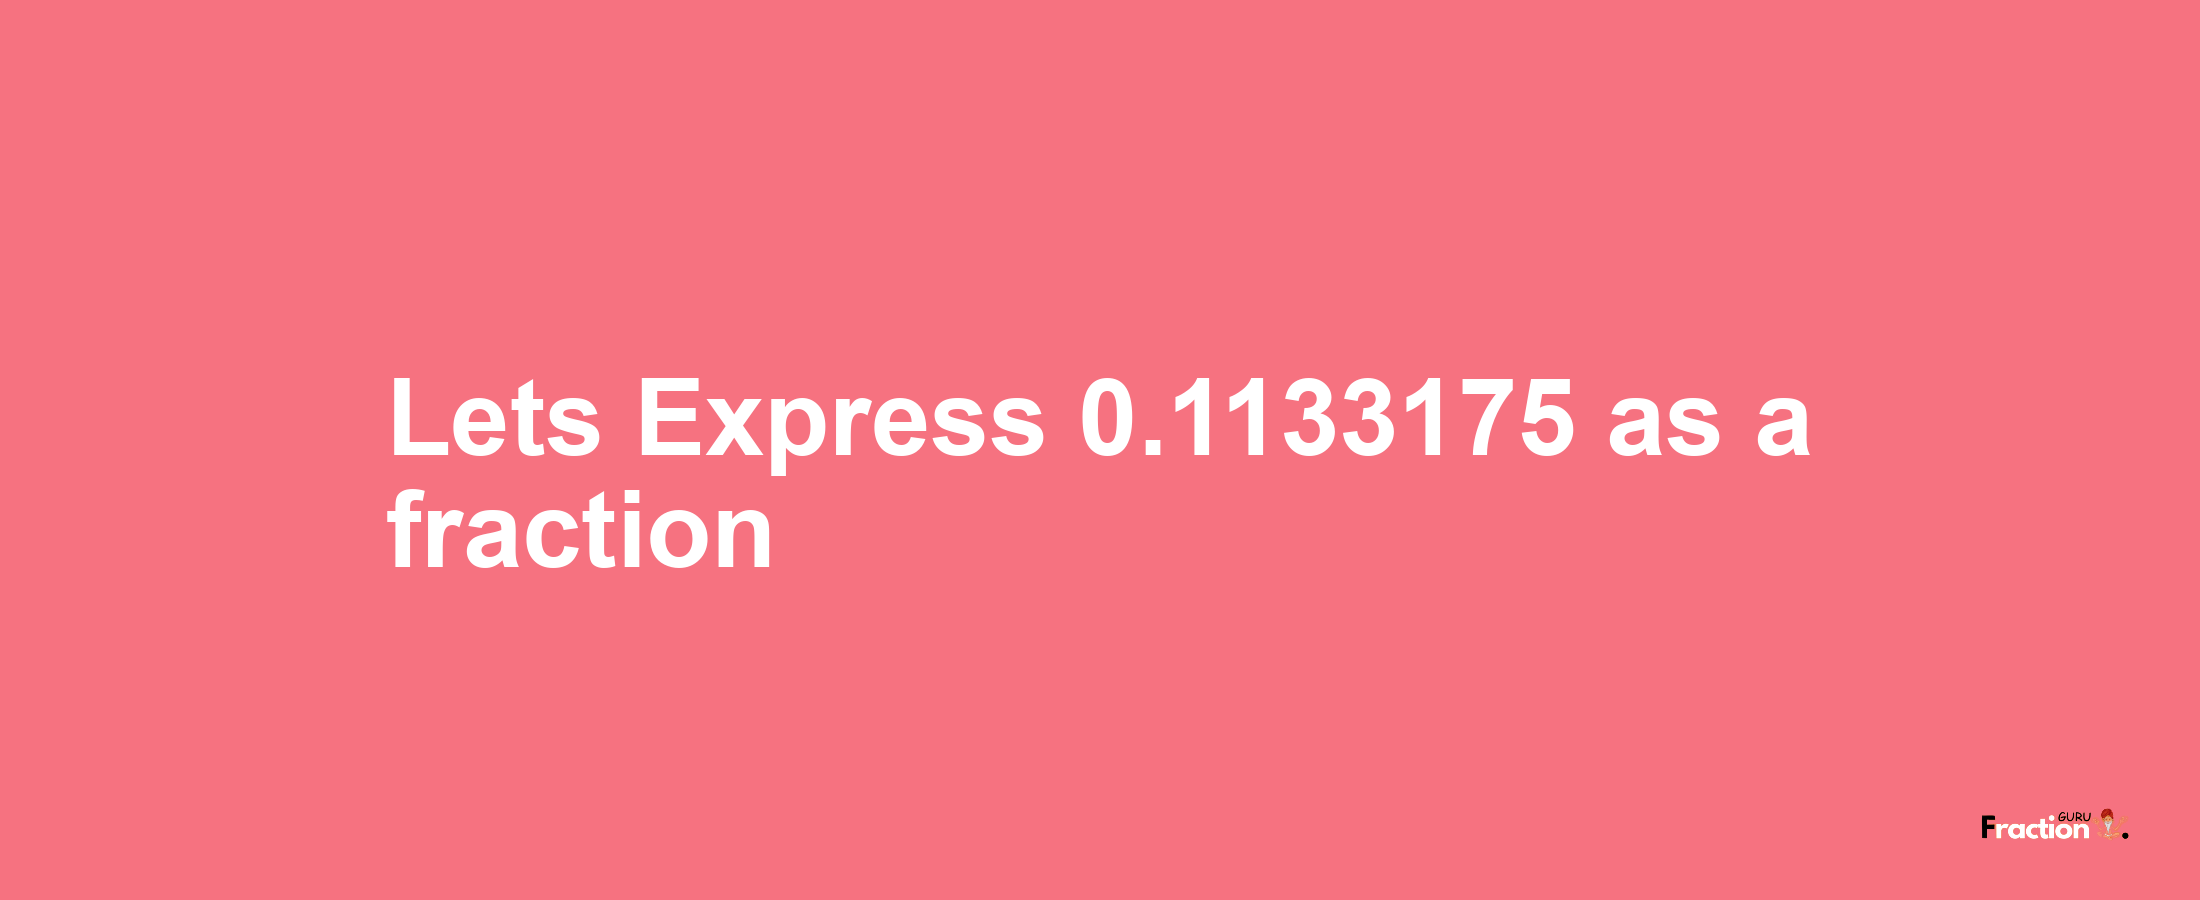 Lets Express 0.1133175 as afraction